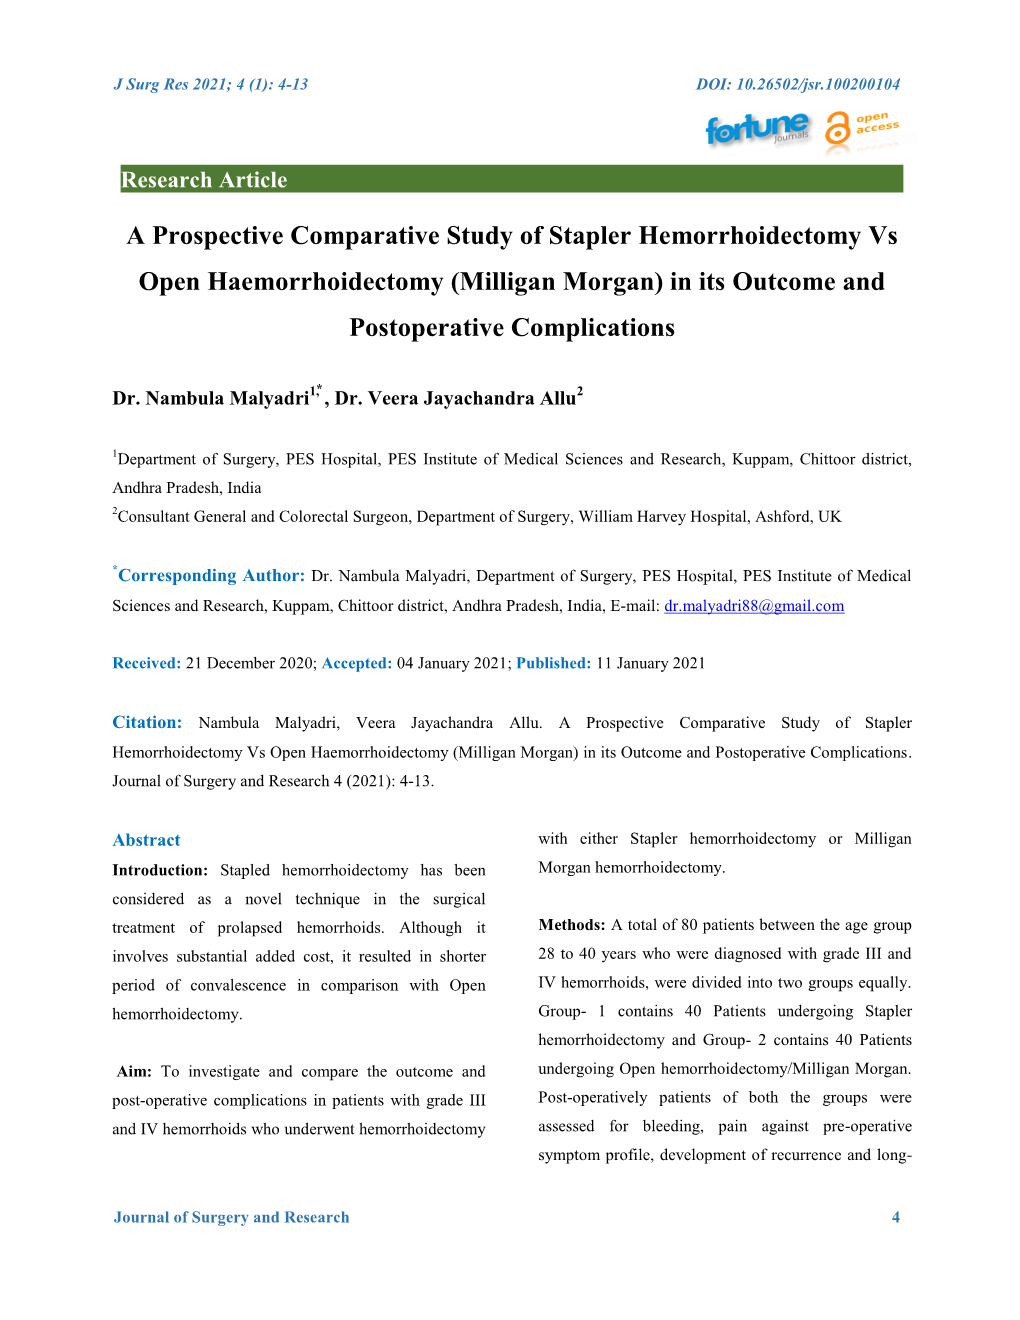 A Prospective Comparative Study of Stapler Hemorrhoidectomy Vs Open Haemorrhoidectomy (Milligan Morgan) in Its Outcome and Postoperative Complications